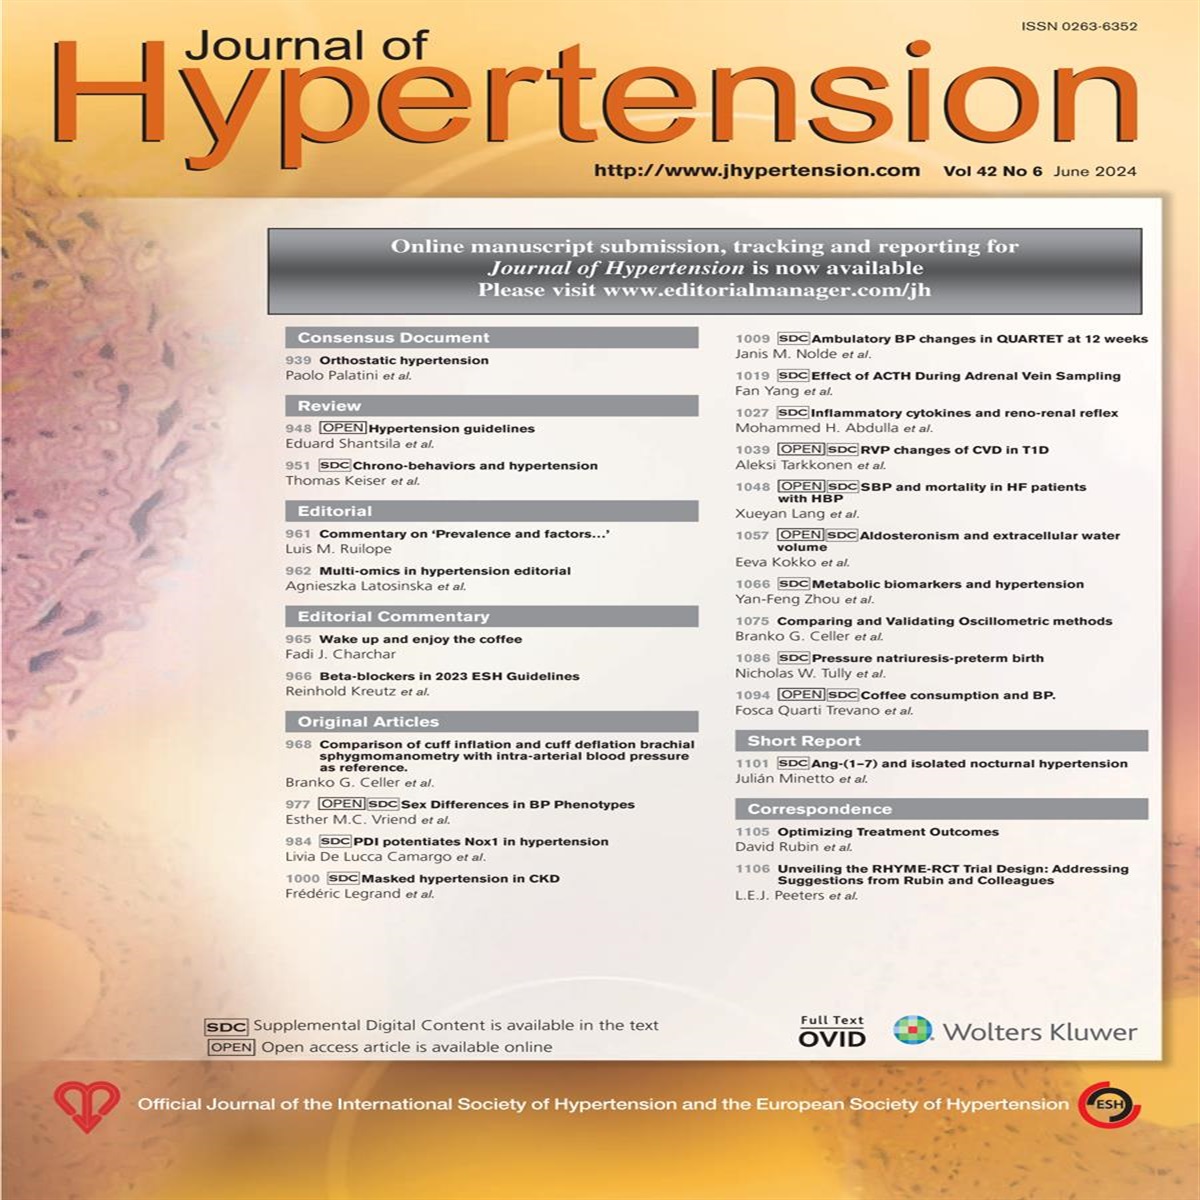 Multiomics: paving the path towards personalized prevention of hypertension